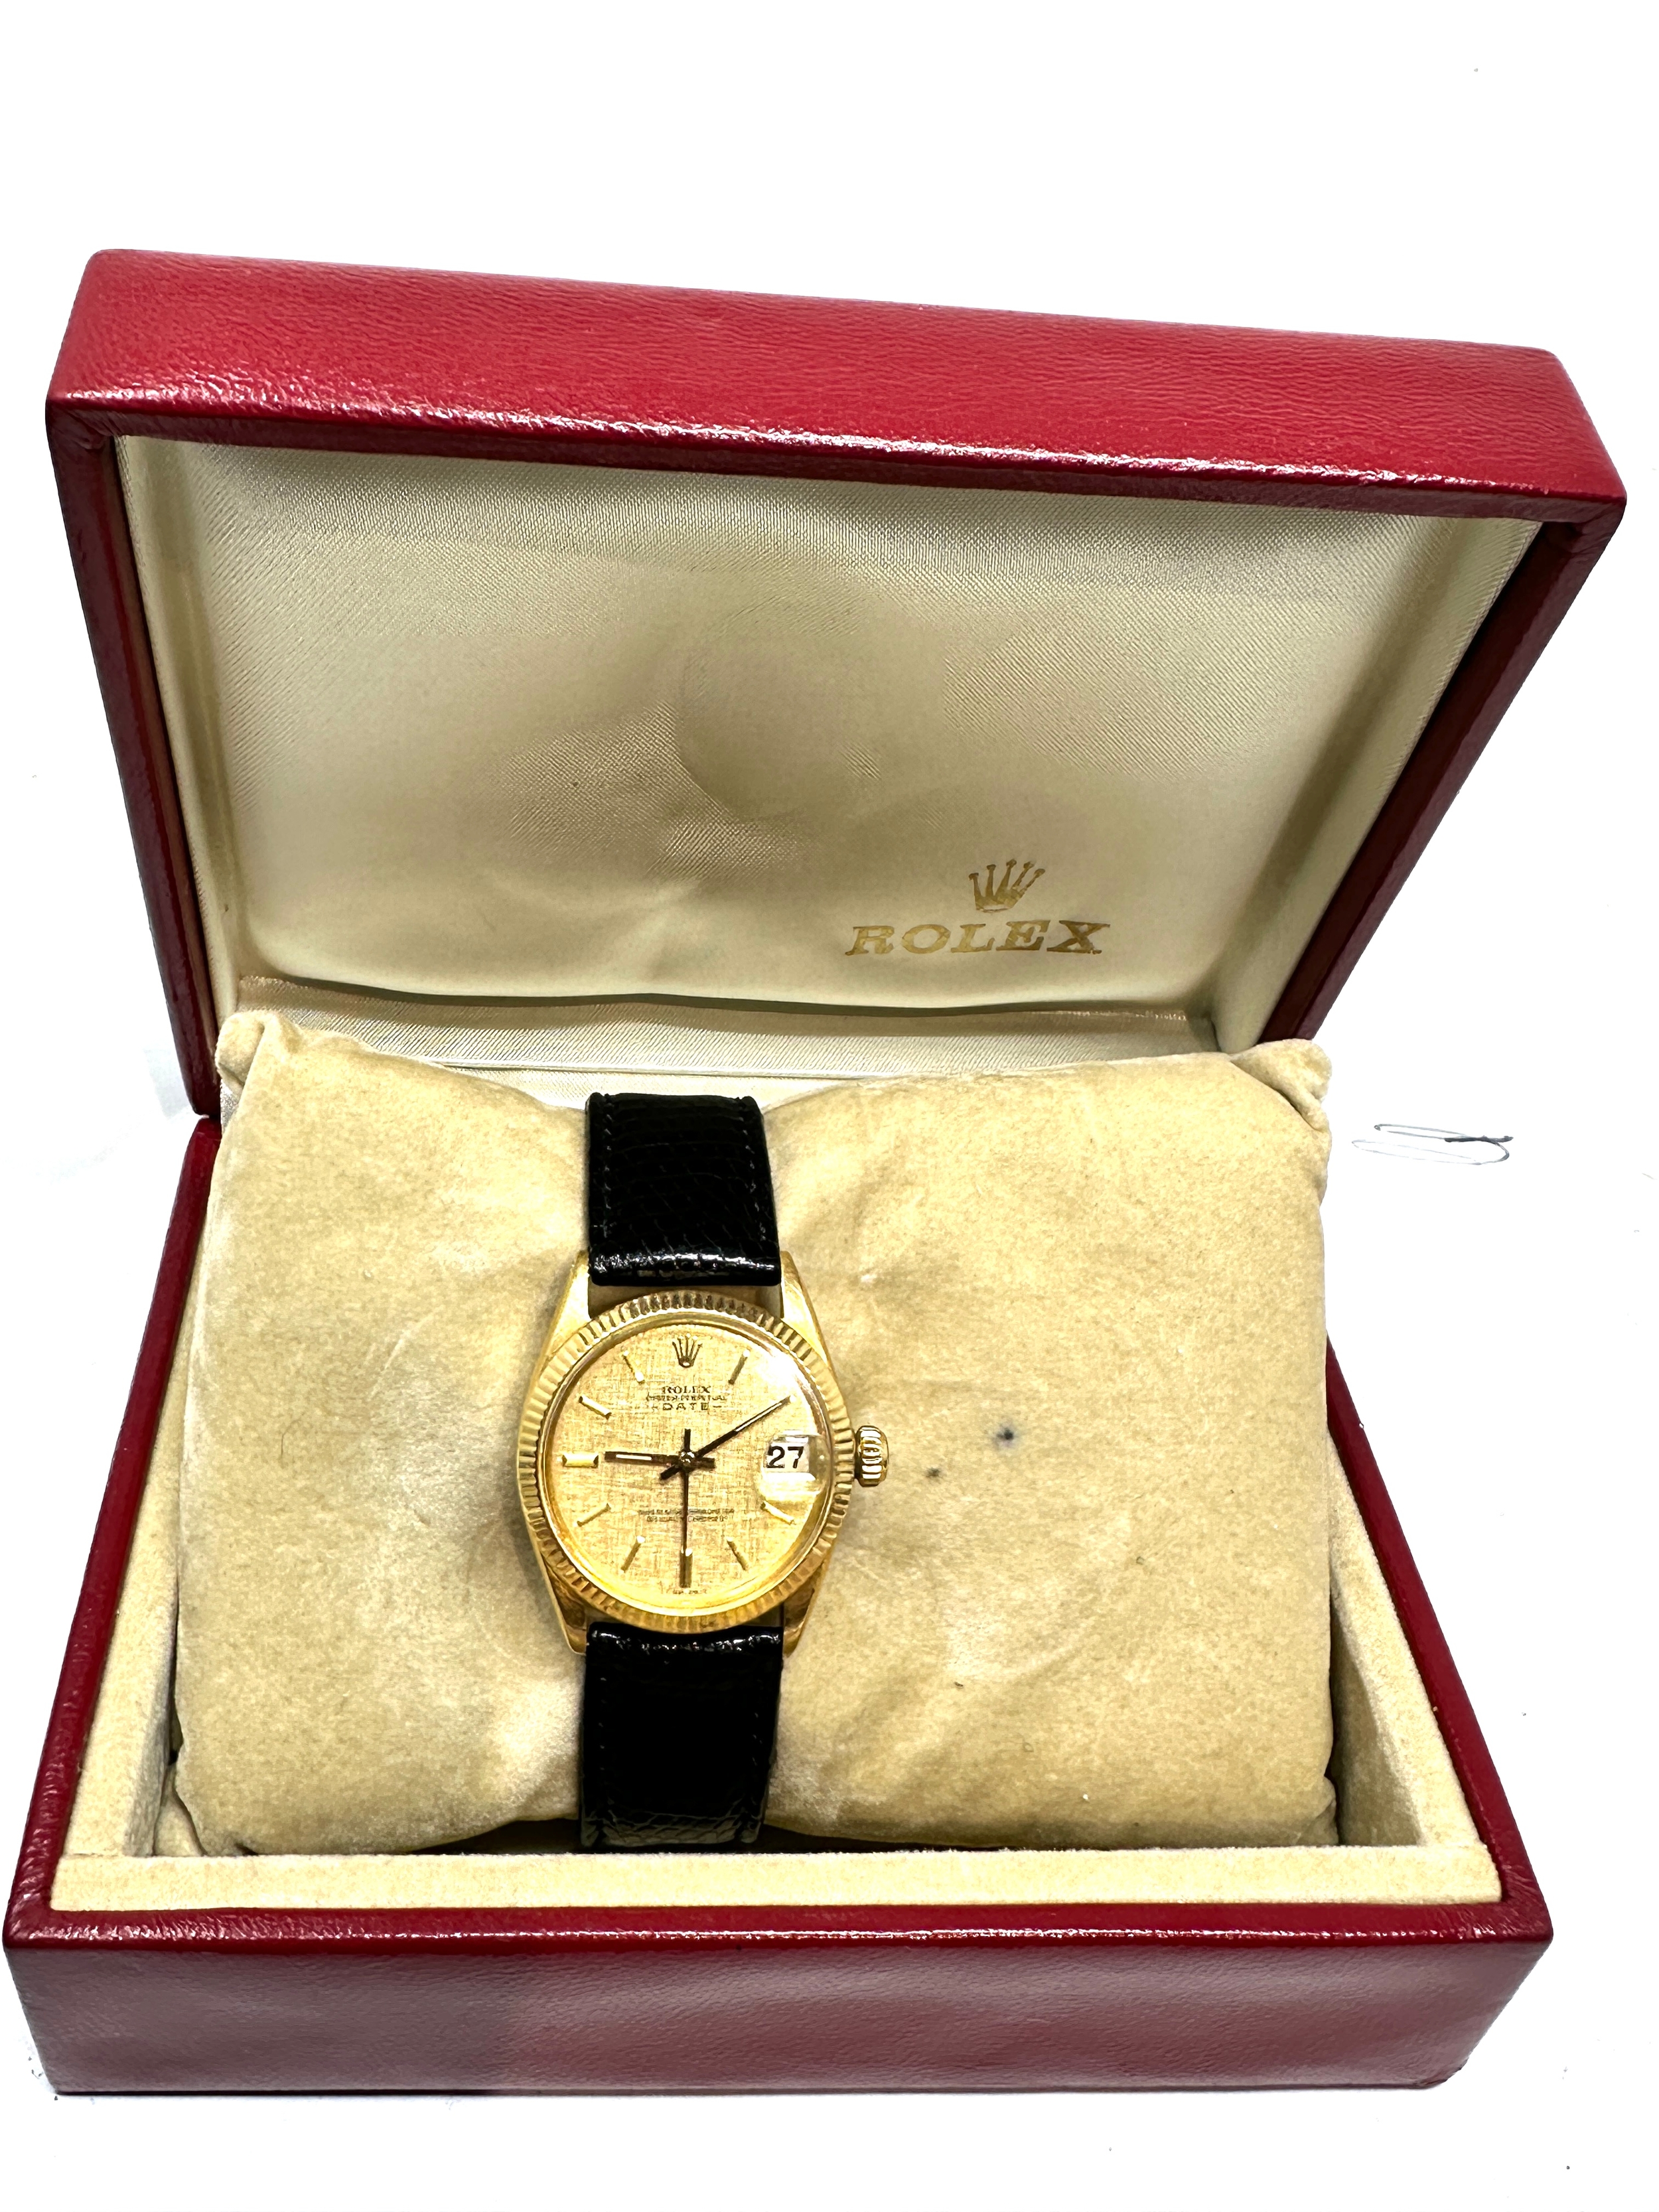 Boxed 18ct gold ladies rolex oyster perpetual date chronometer with black leather strap with 18ct